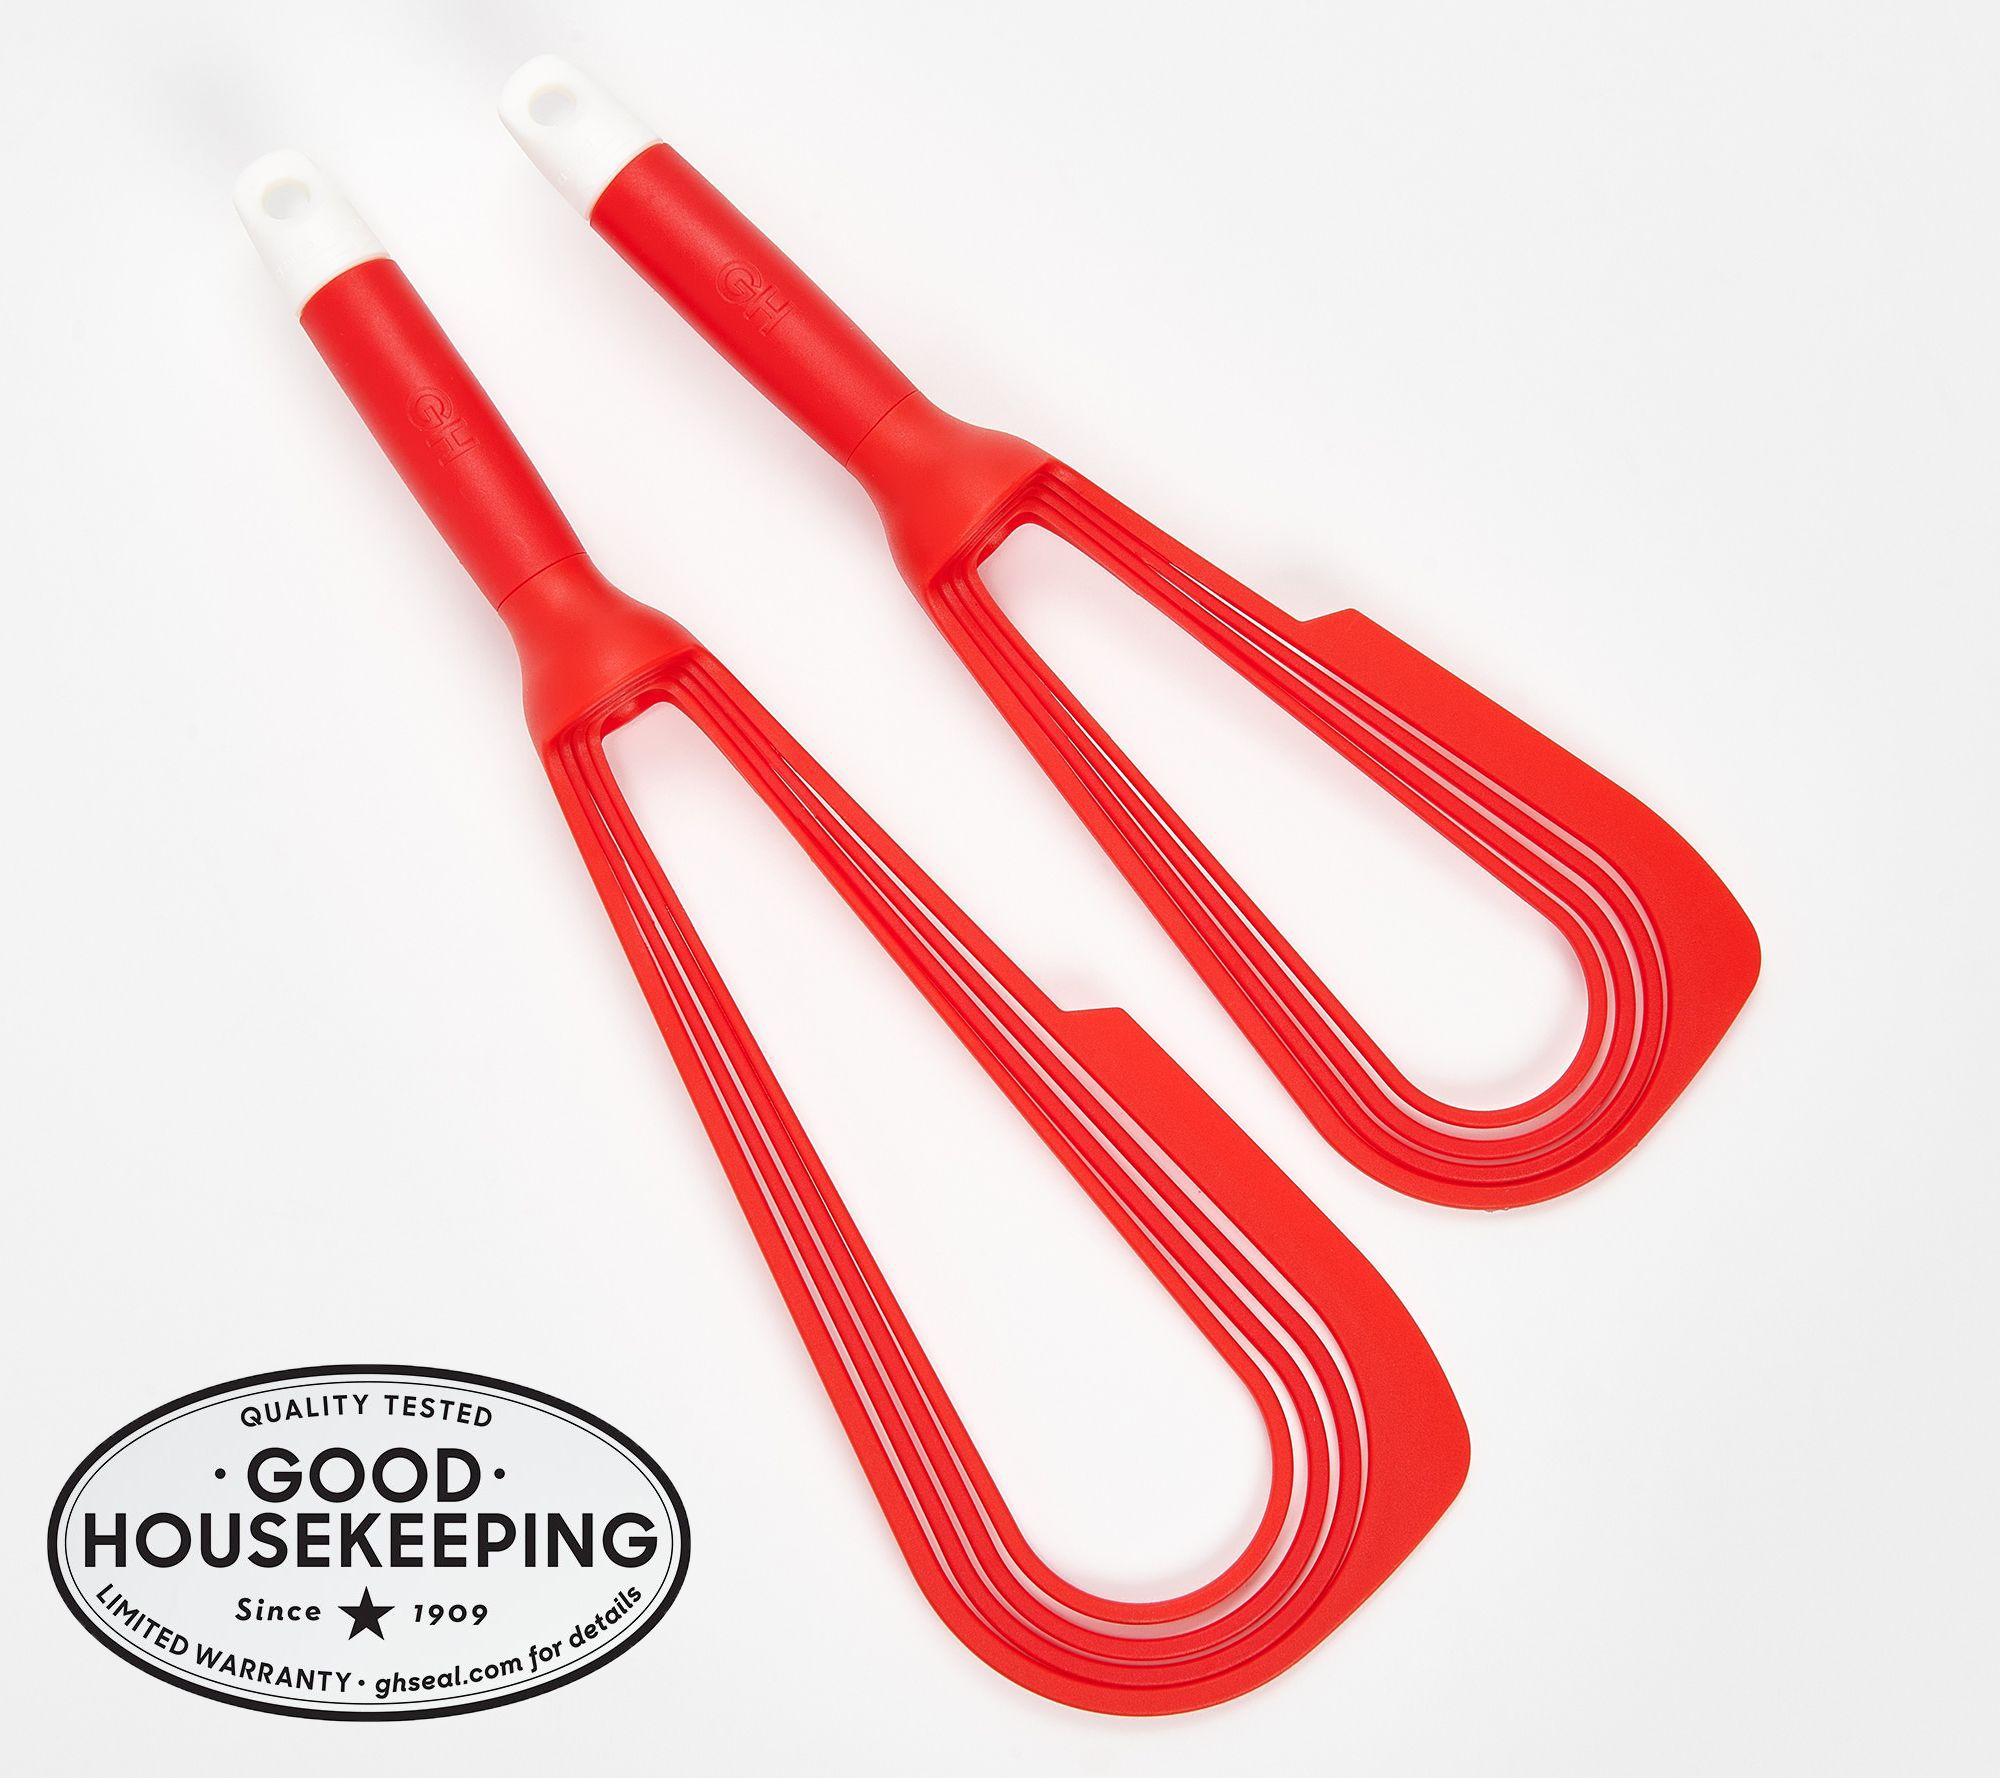 Promotional Twist-Action Collapsible Whisks, Household